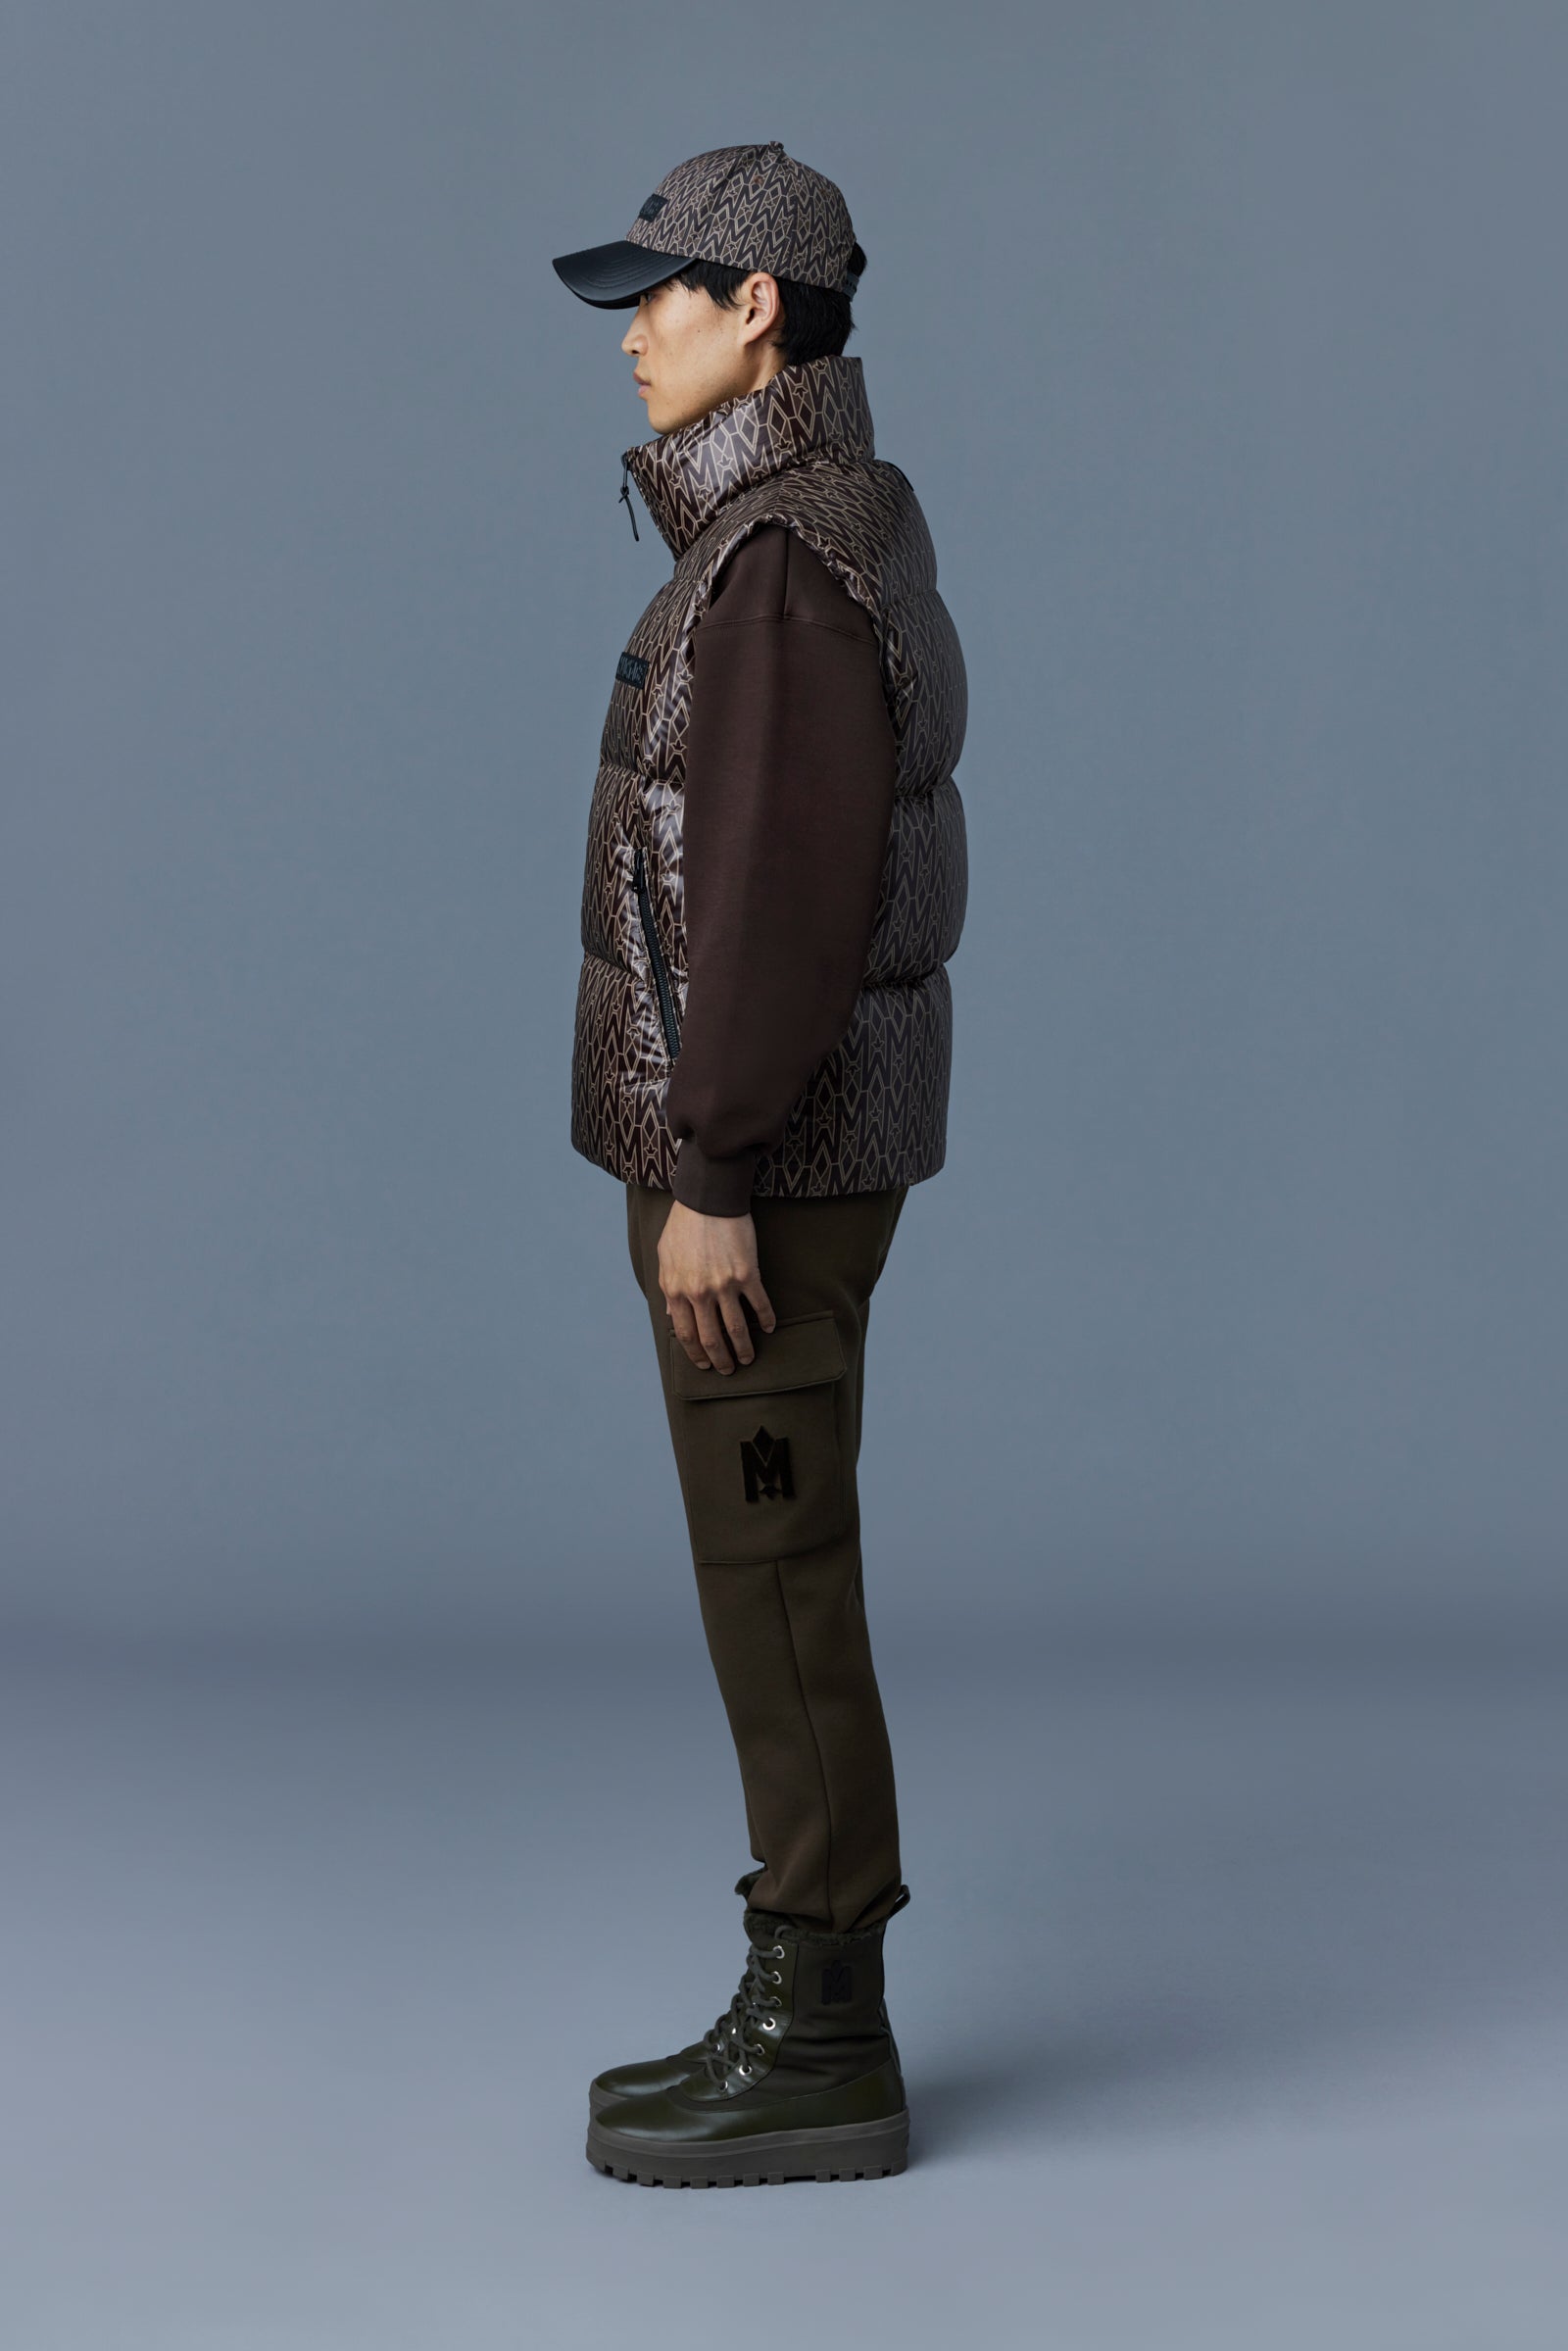 Shop Mackage Kane Down Quilted Puffer Vest